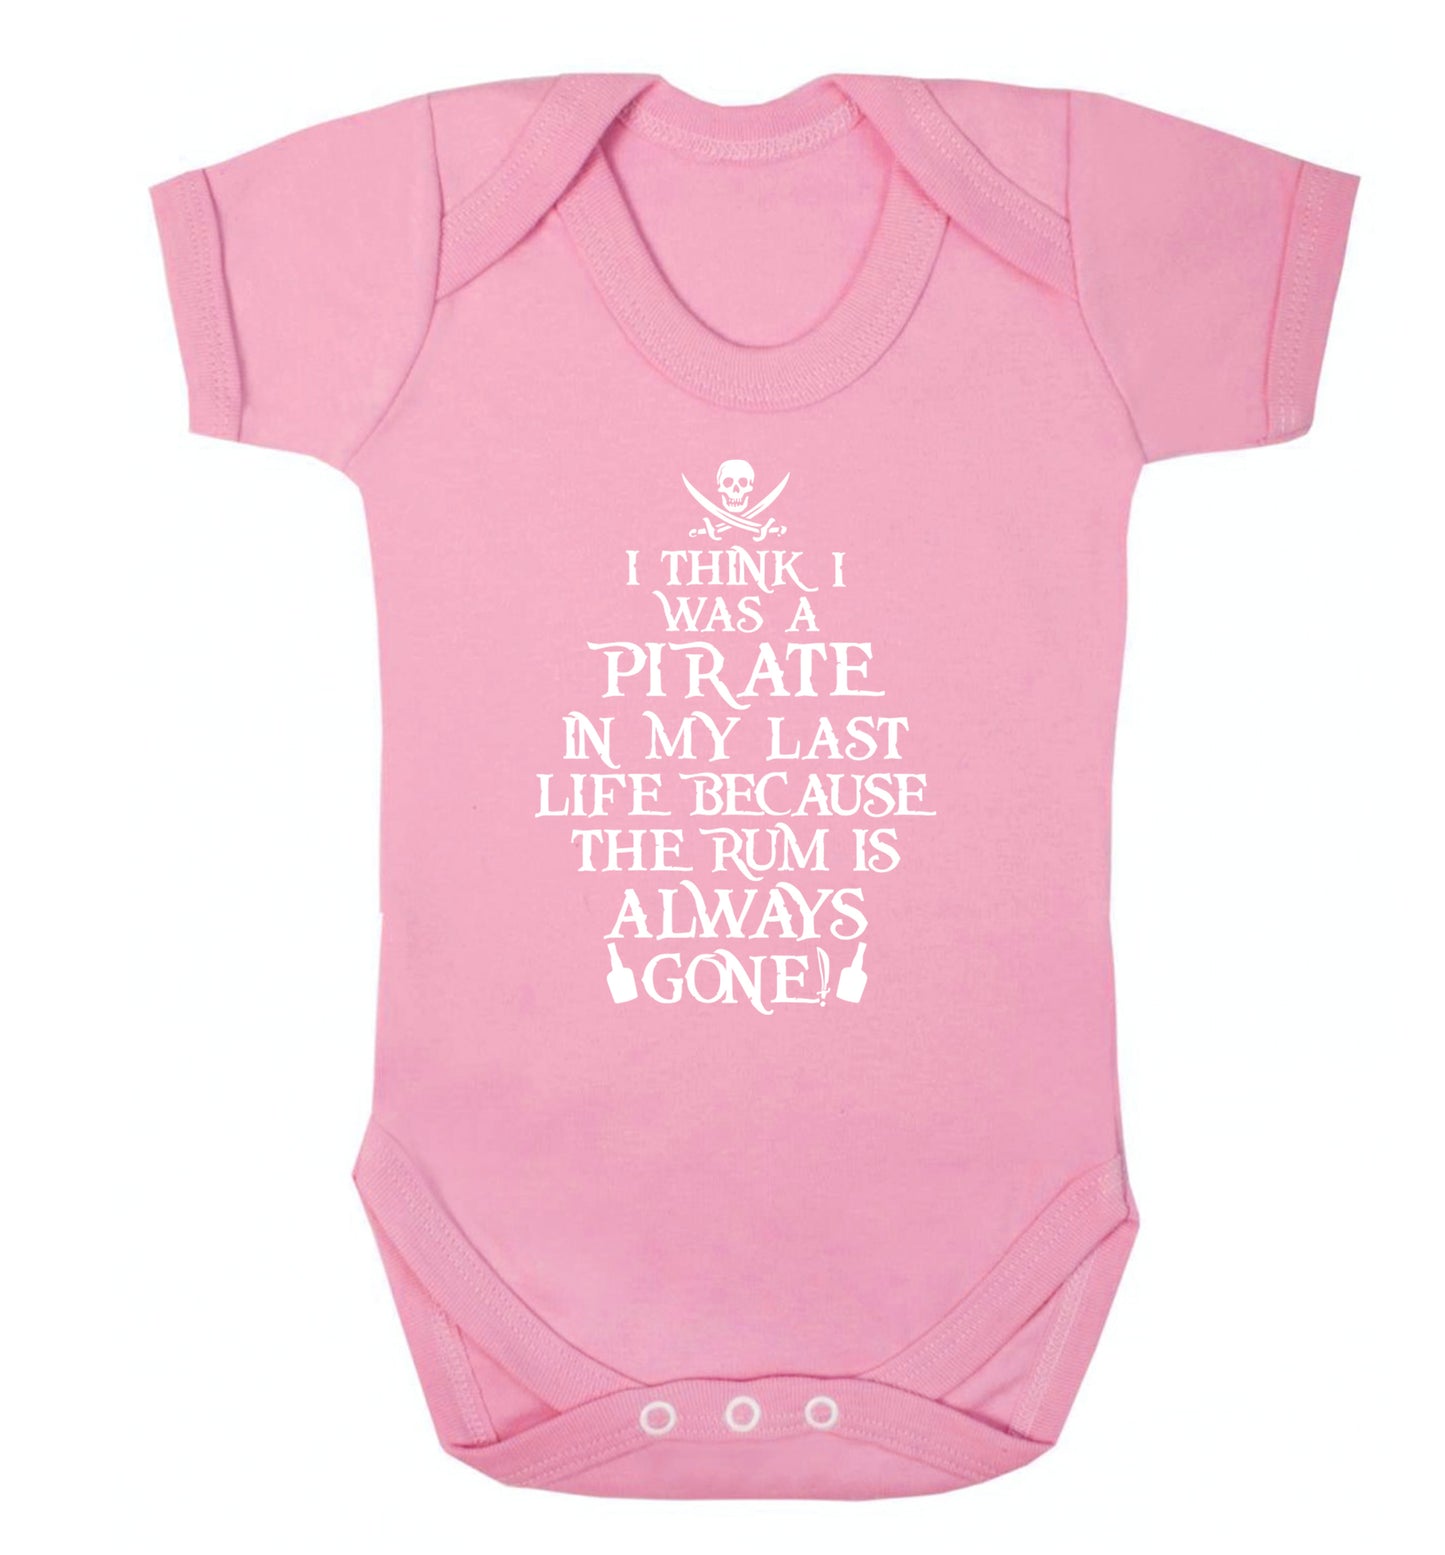 I think I was a pirate in my past life because the rum is always gone! Baby Vest pale pink 18-24 months